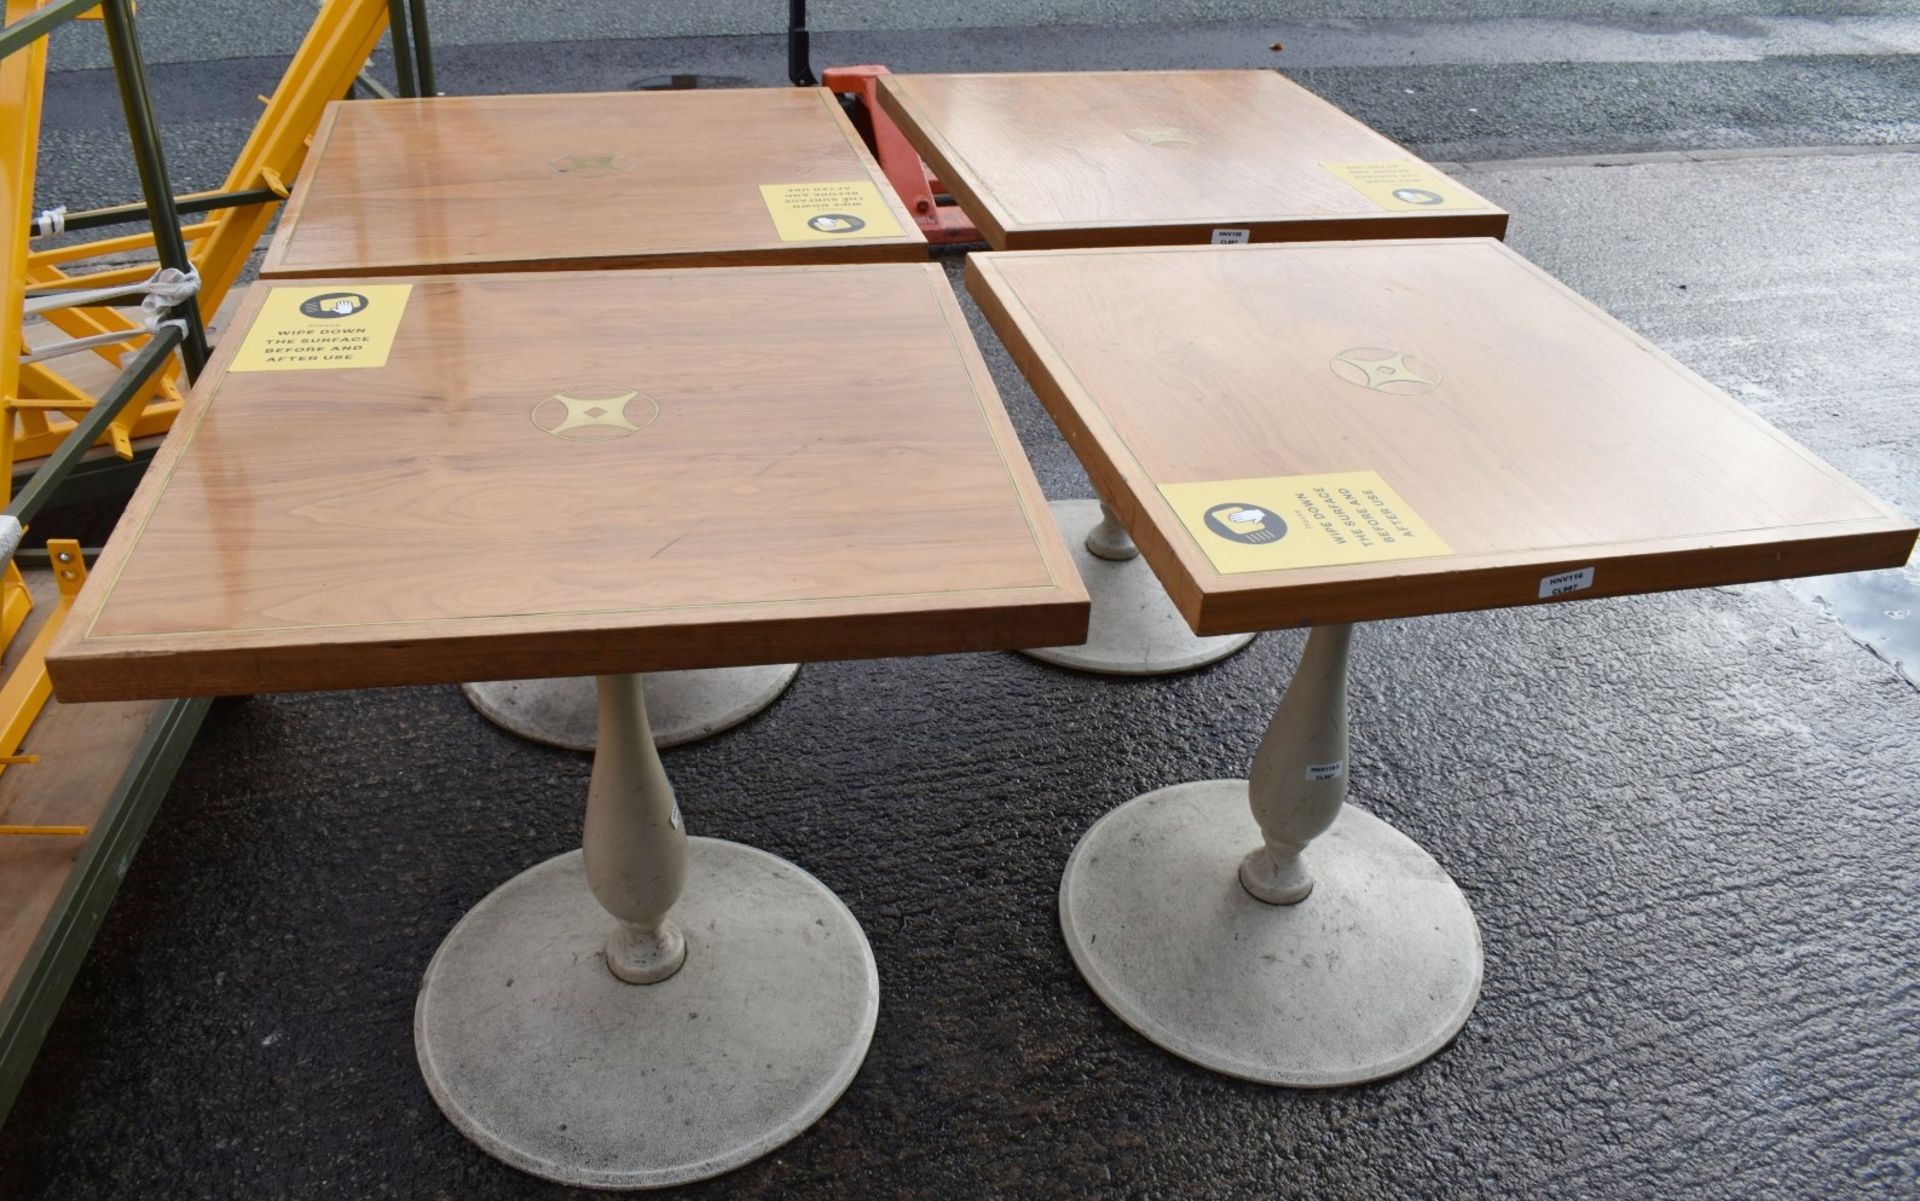 4 x Wooden Topped Bistro Tables Featuring Inlaid Brass Work And Sturdy Metal Bases - Recently - Image 2 of 7